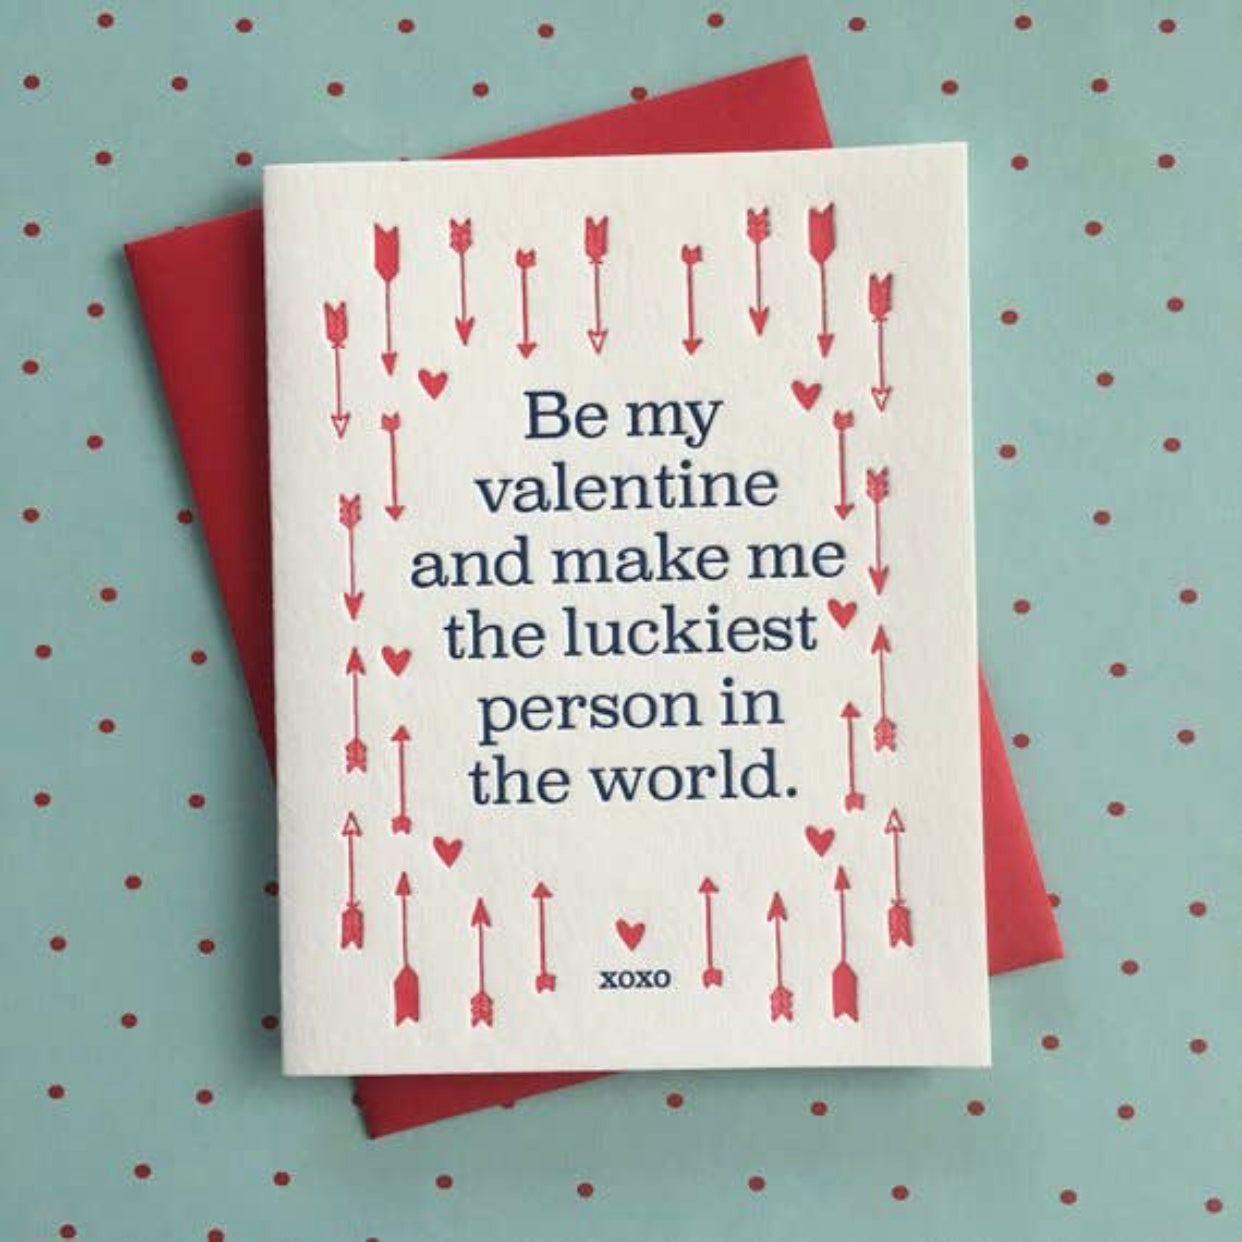 Be my Valentines greeting card